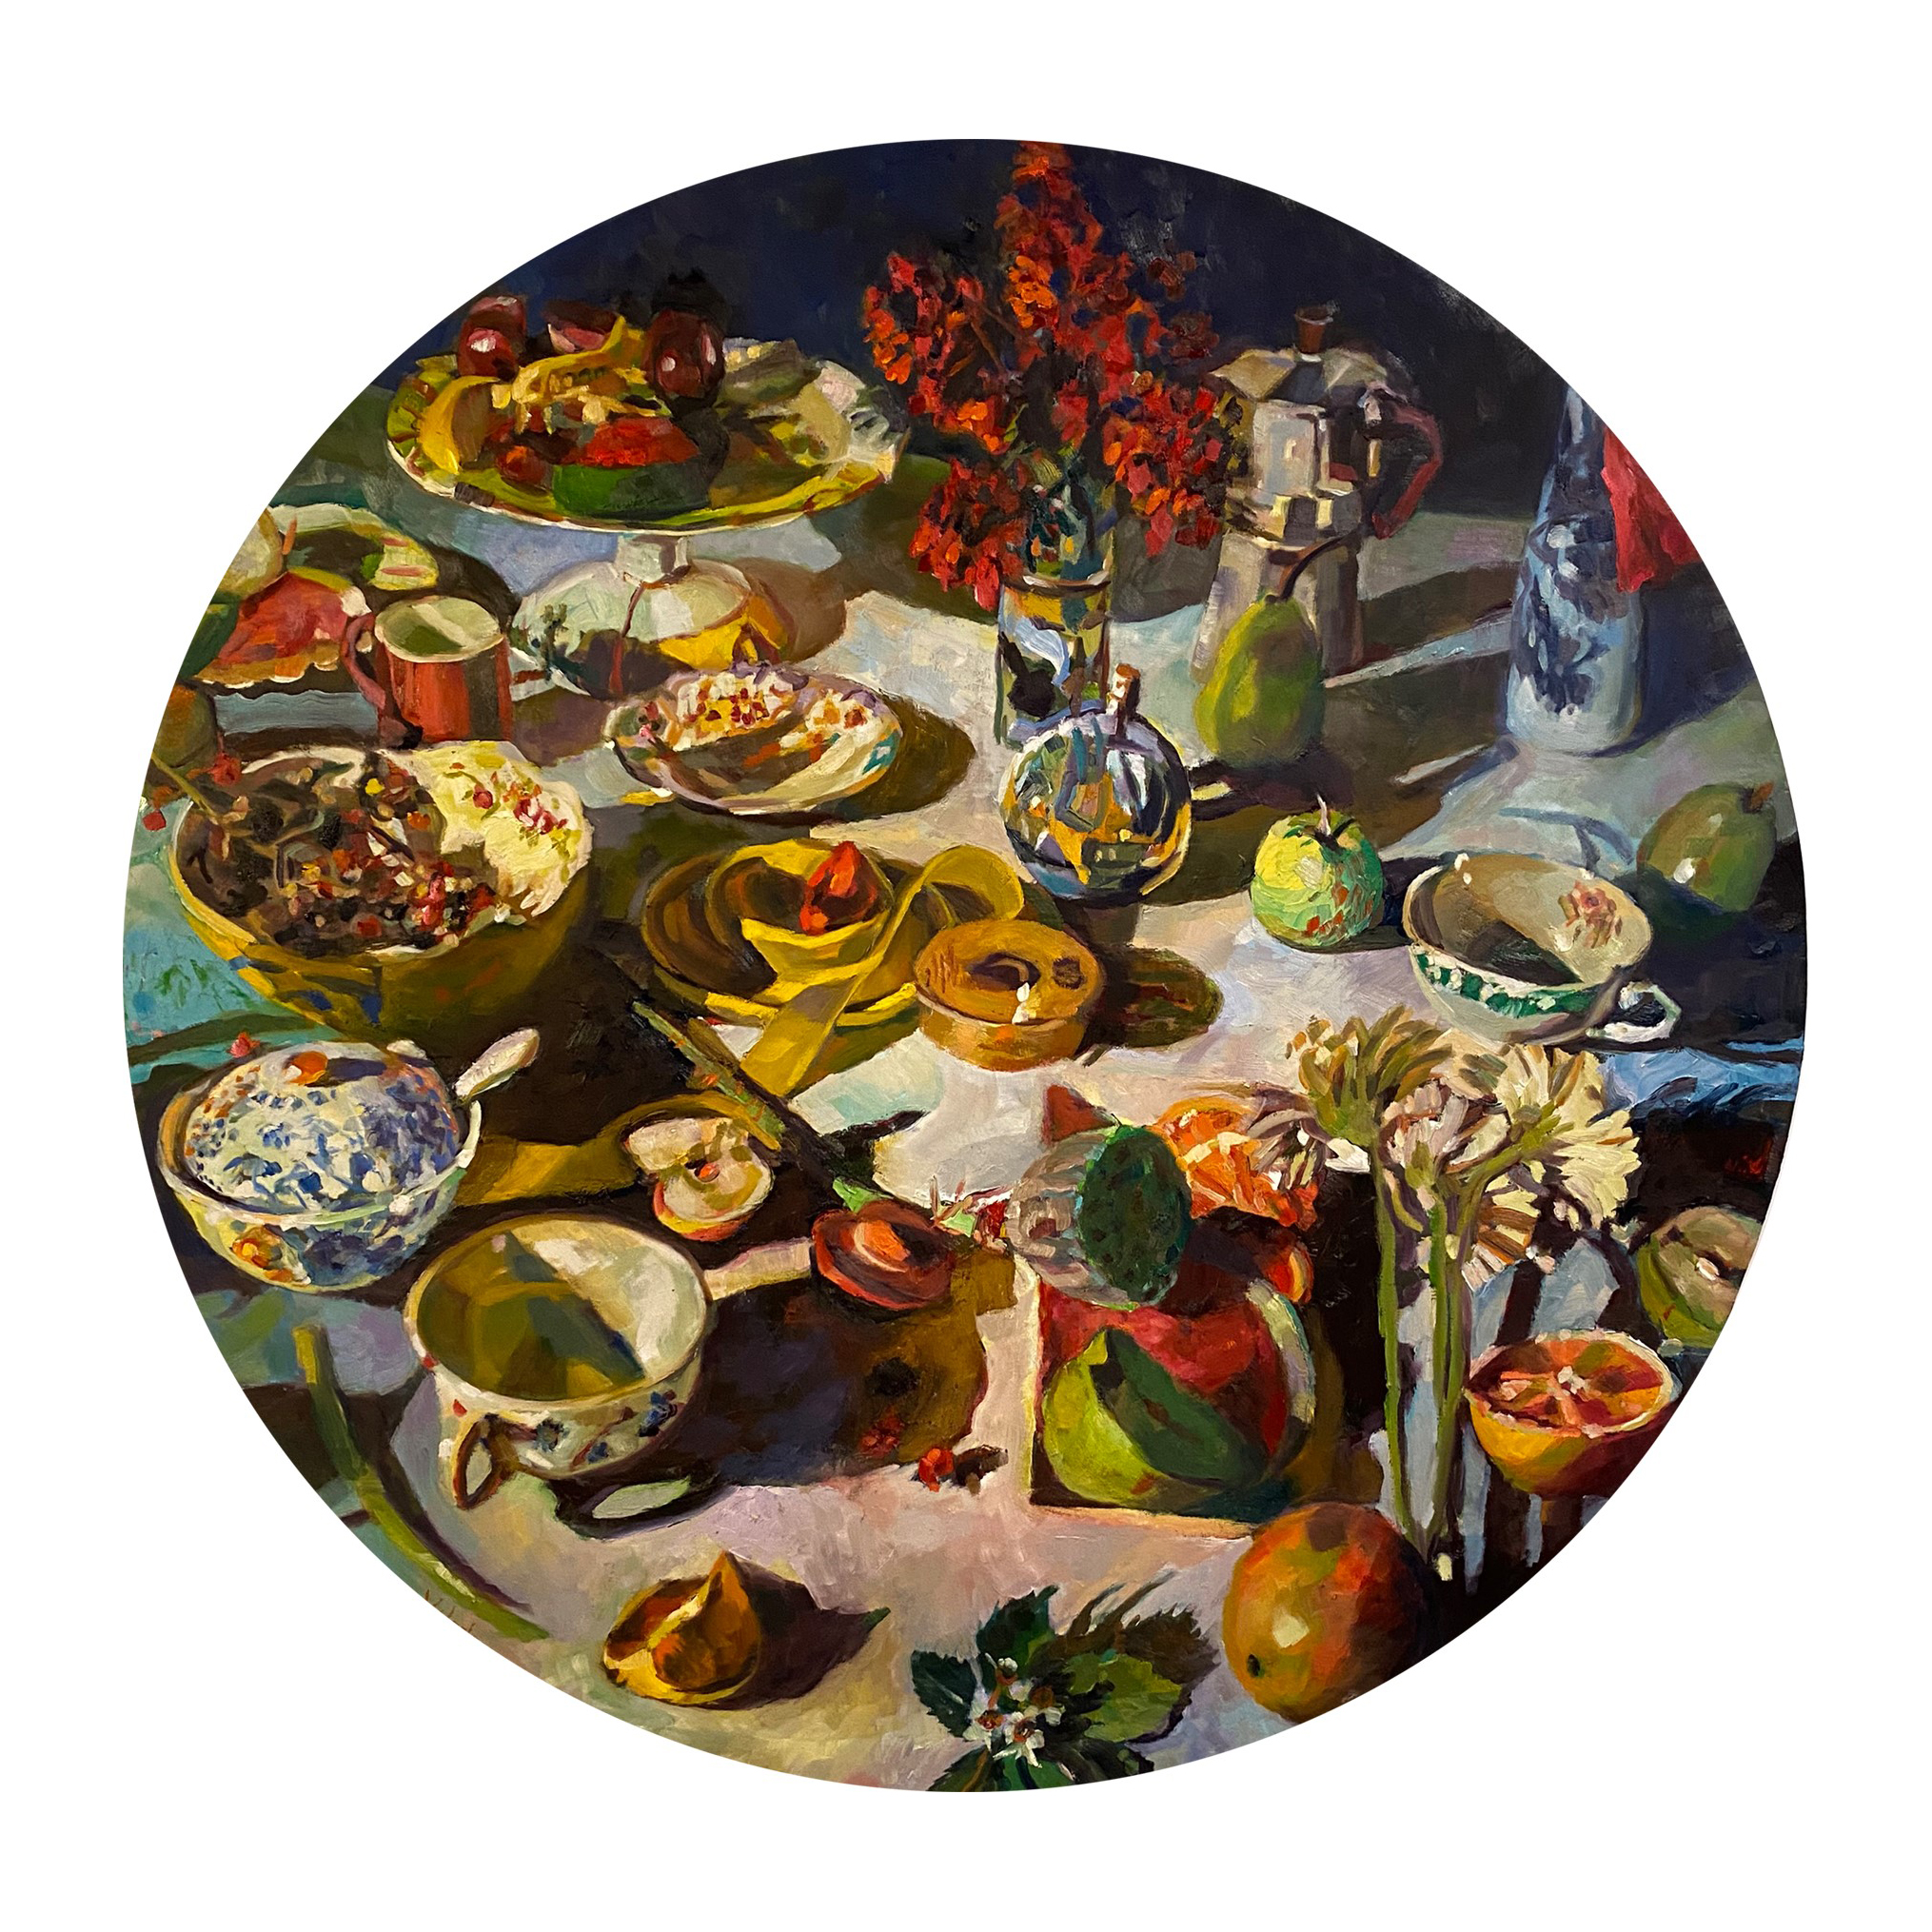 Rosemary Valadon 'Almost Everything' oil on wood panel tondo 122cm $25,000